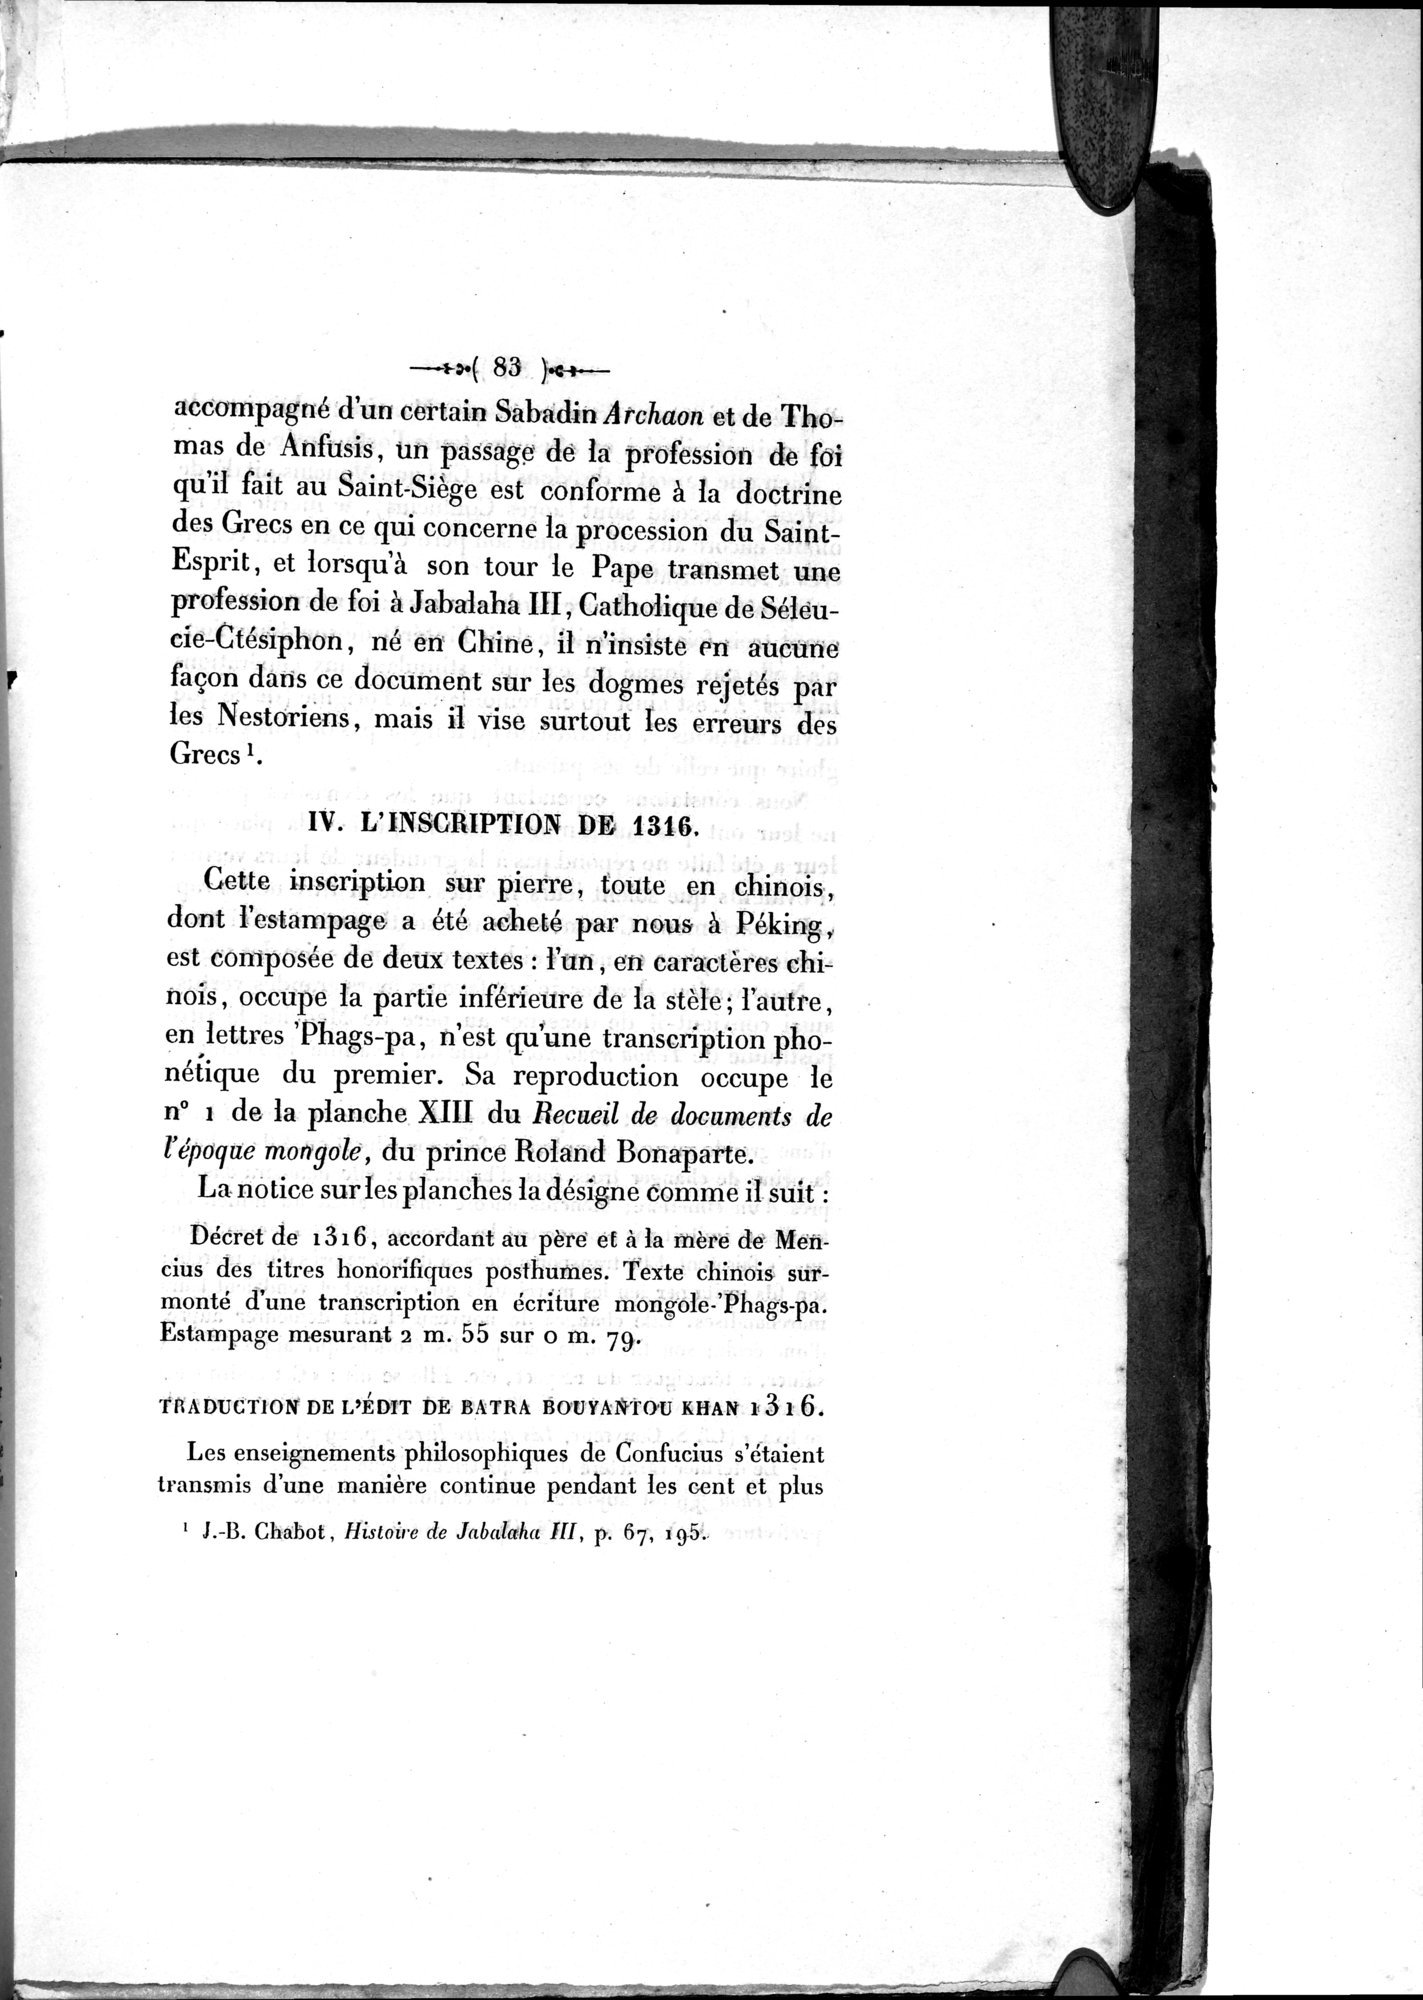 Notes d'epigraphie mongole-chinoise : vol.1 / Page 89 (Grayscale High Resolution Image)